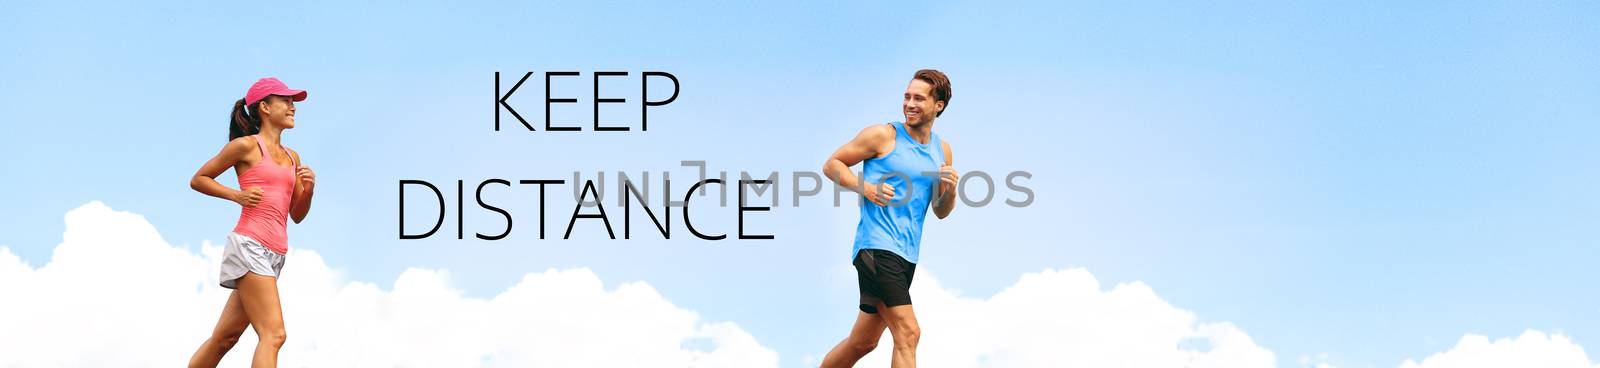 KEEP DISTANCE social distancing COVID-19 people walking running exercising outdoor in city. Healthy active runners man woman jogging header summer lifestyle banner by Maridav